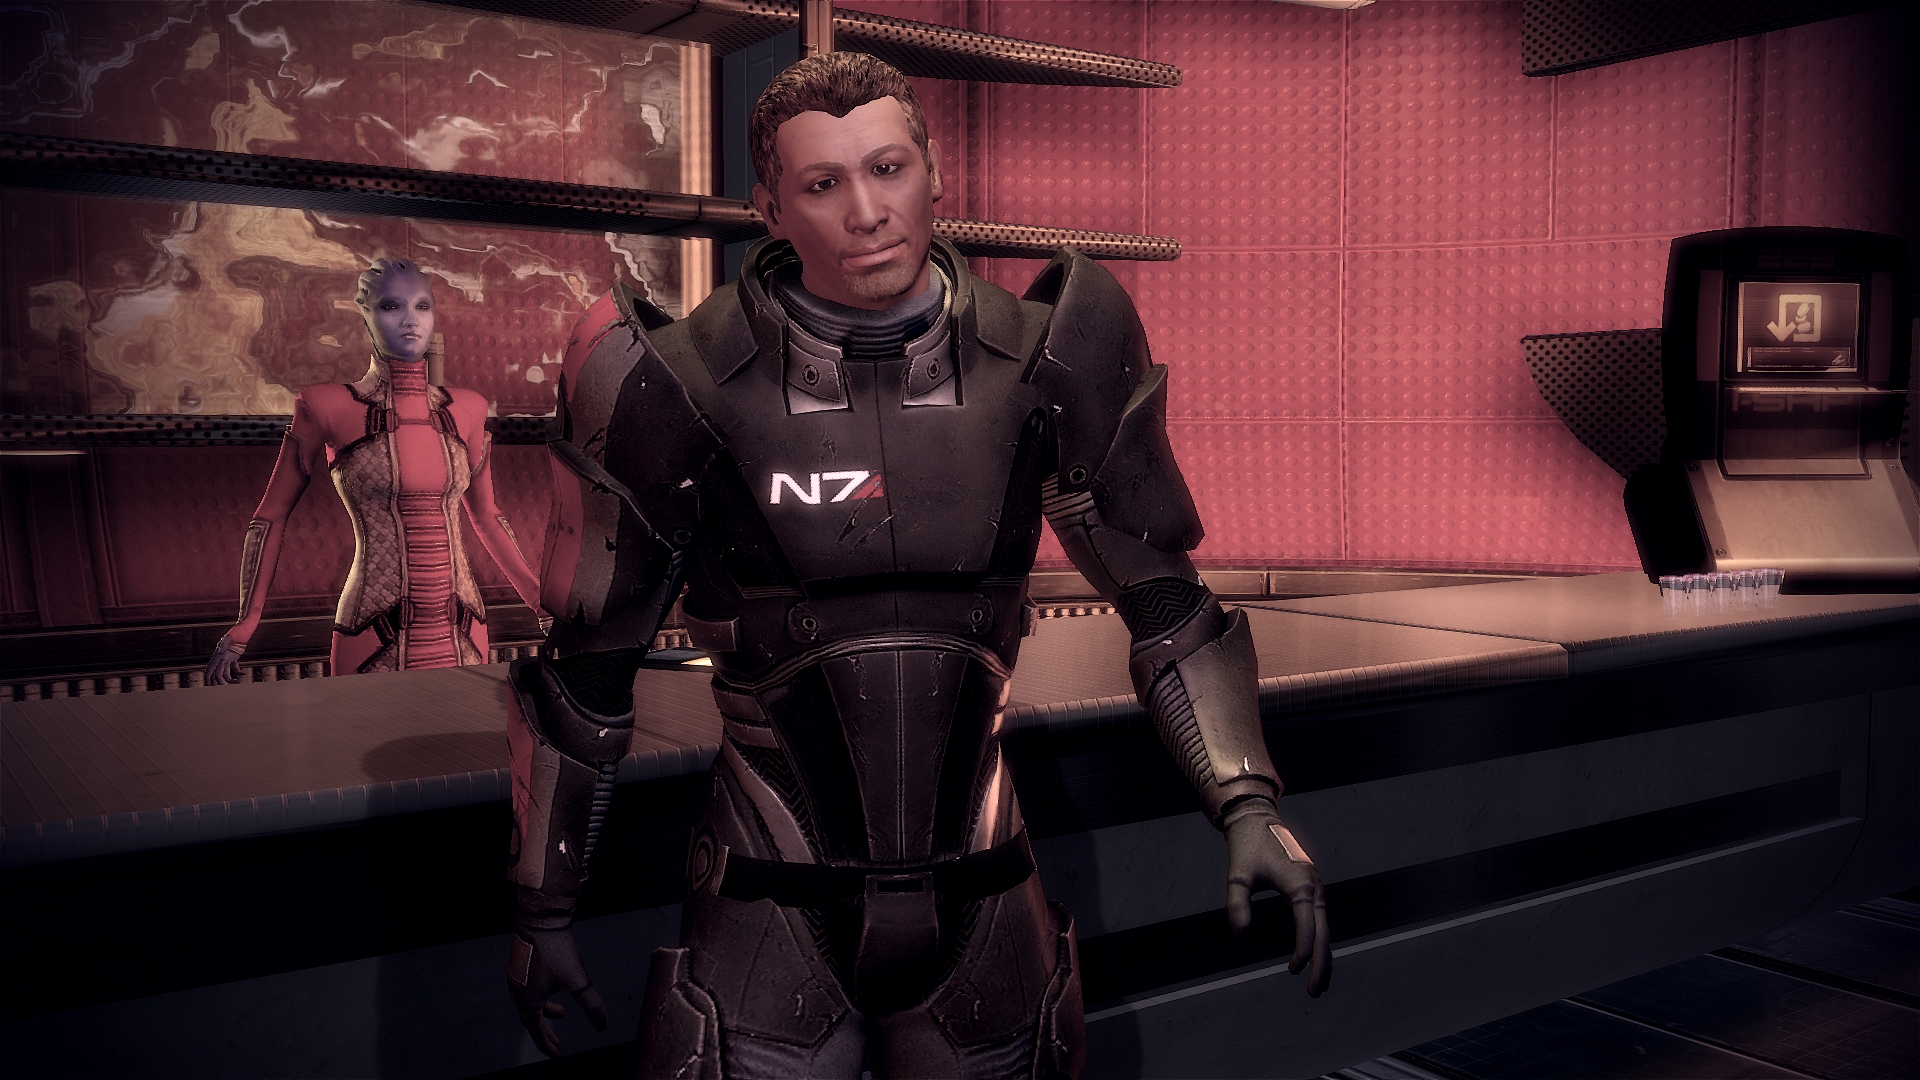 The Mass Effect writing contest winner: Seashell research on ...